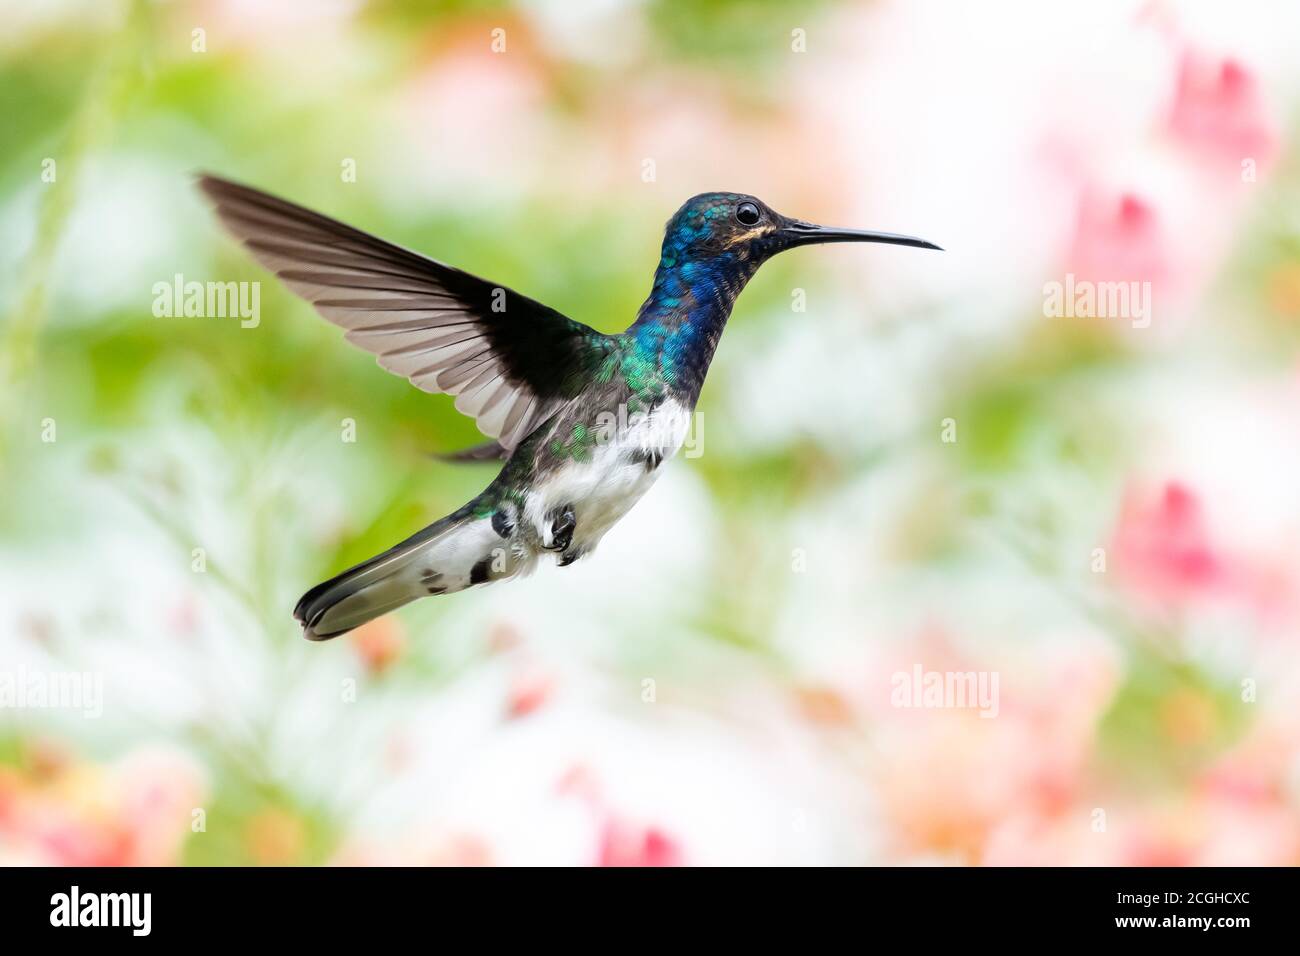 A juvenile White-necked Jacobin hovering with a pastel blurred background.  Bird in a garden. Hummingbird in natural surrounding Stock Photo - Alamy